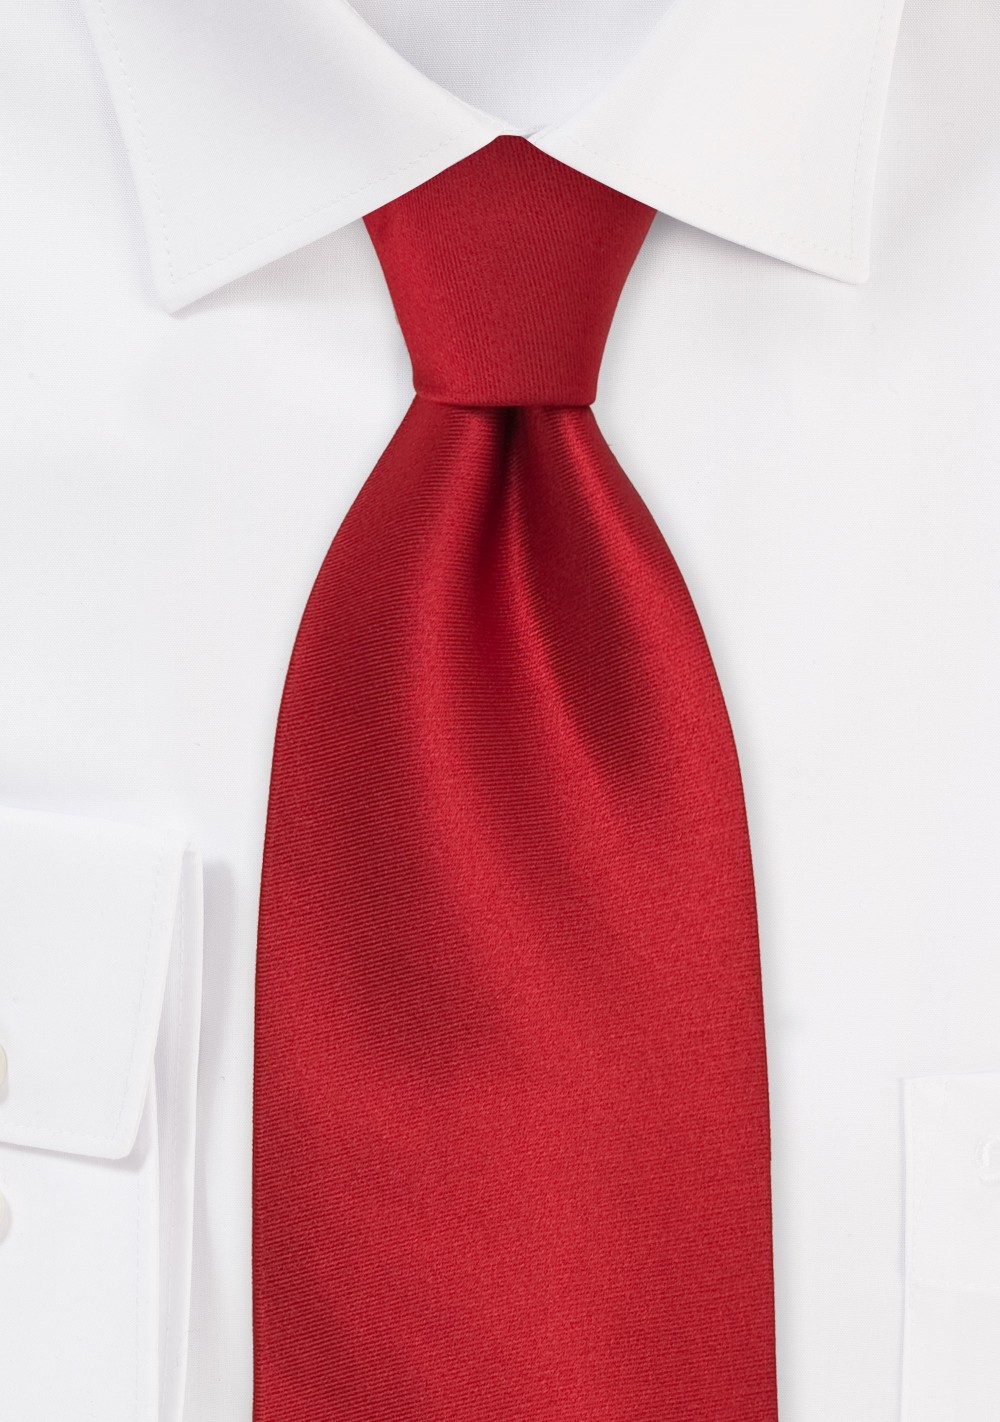 Solid Color Red Tie  - Handmade silk tie in solid bright red